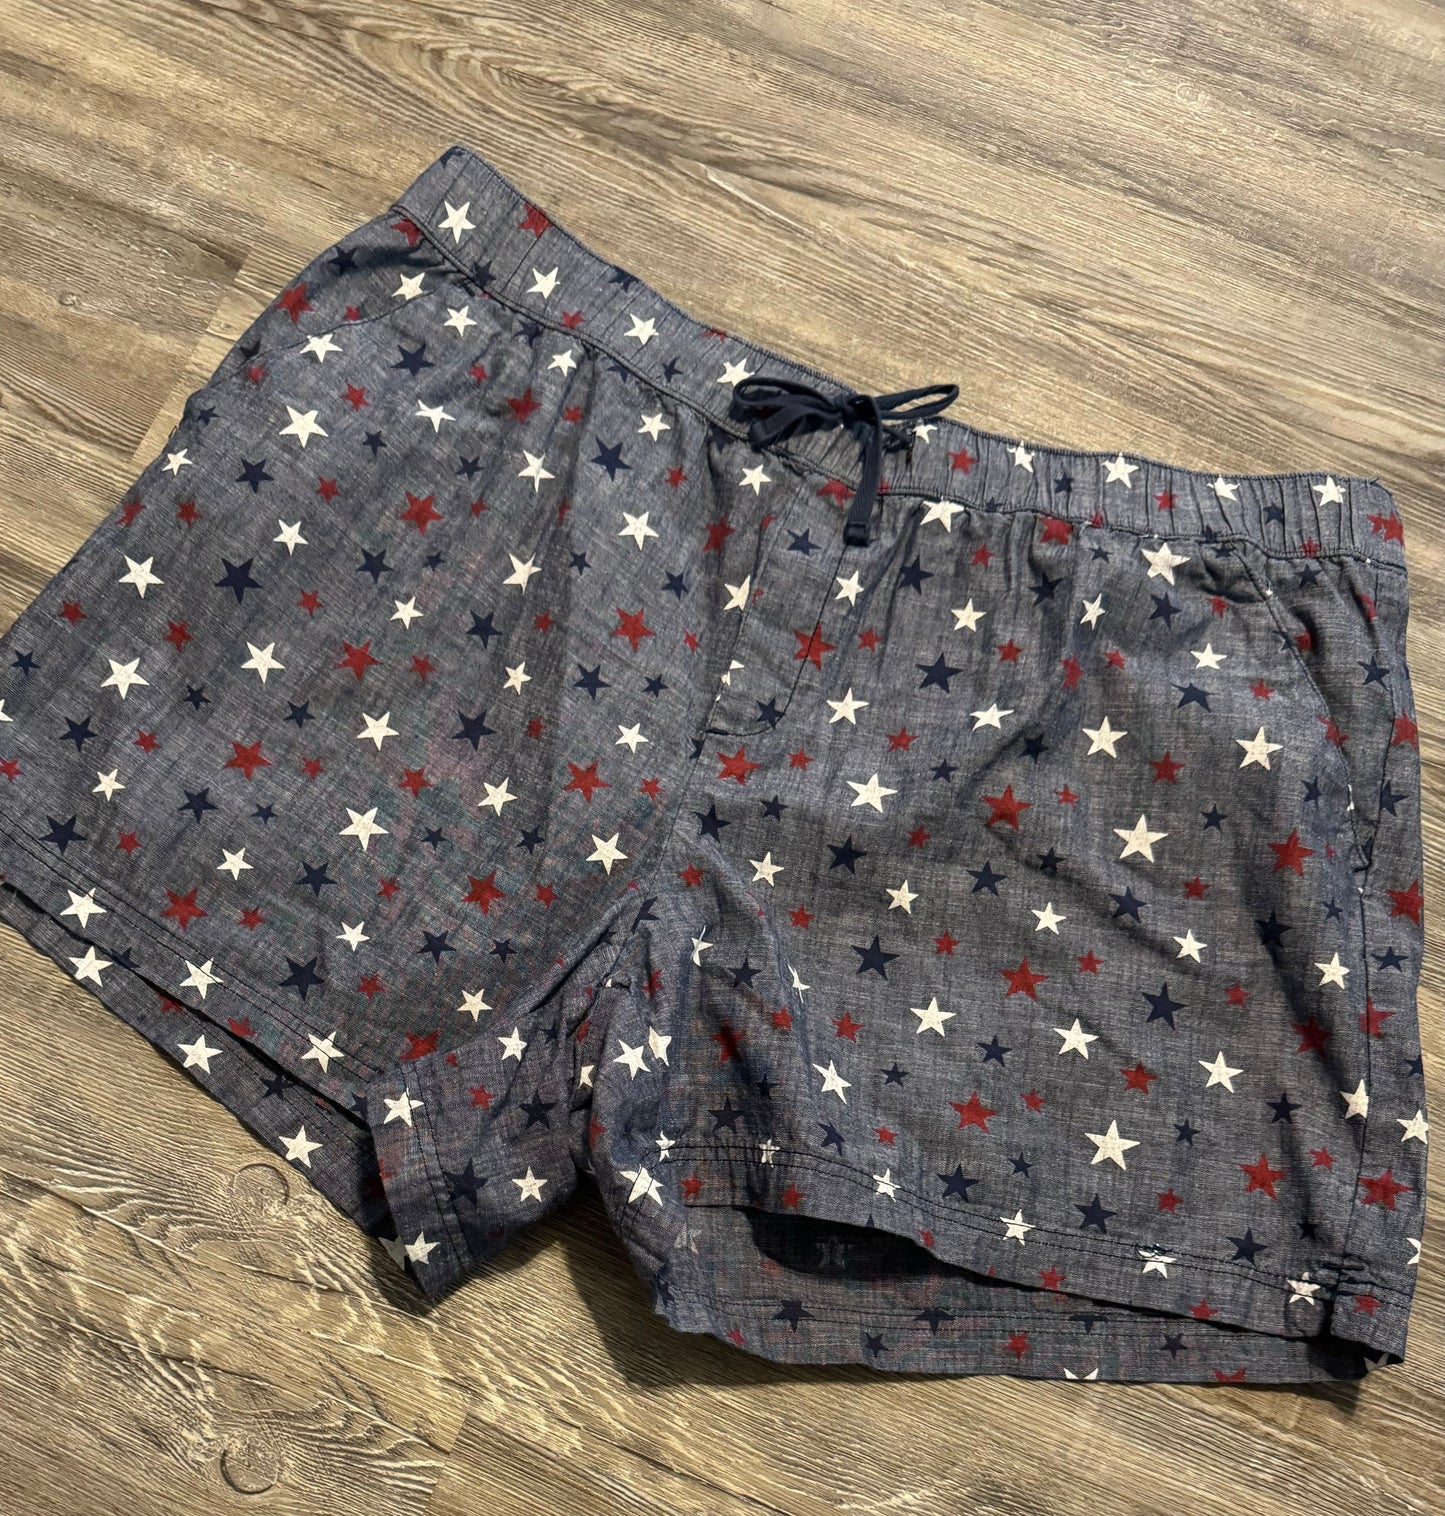 Shorts By Bcg  Size: 2x